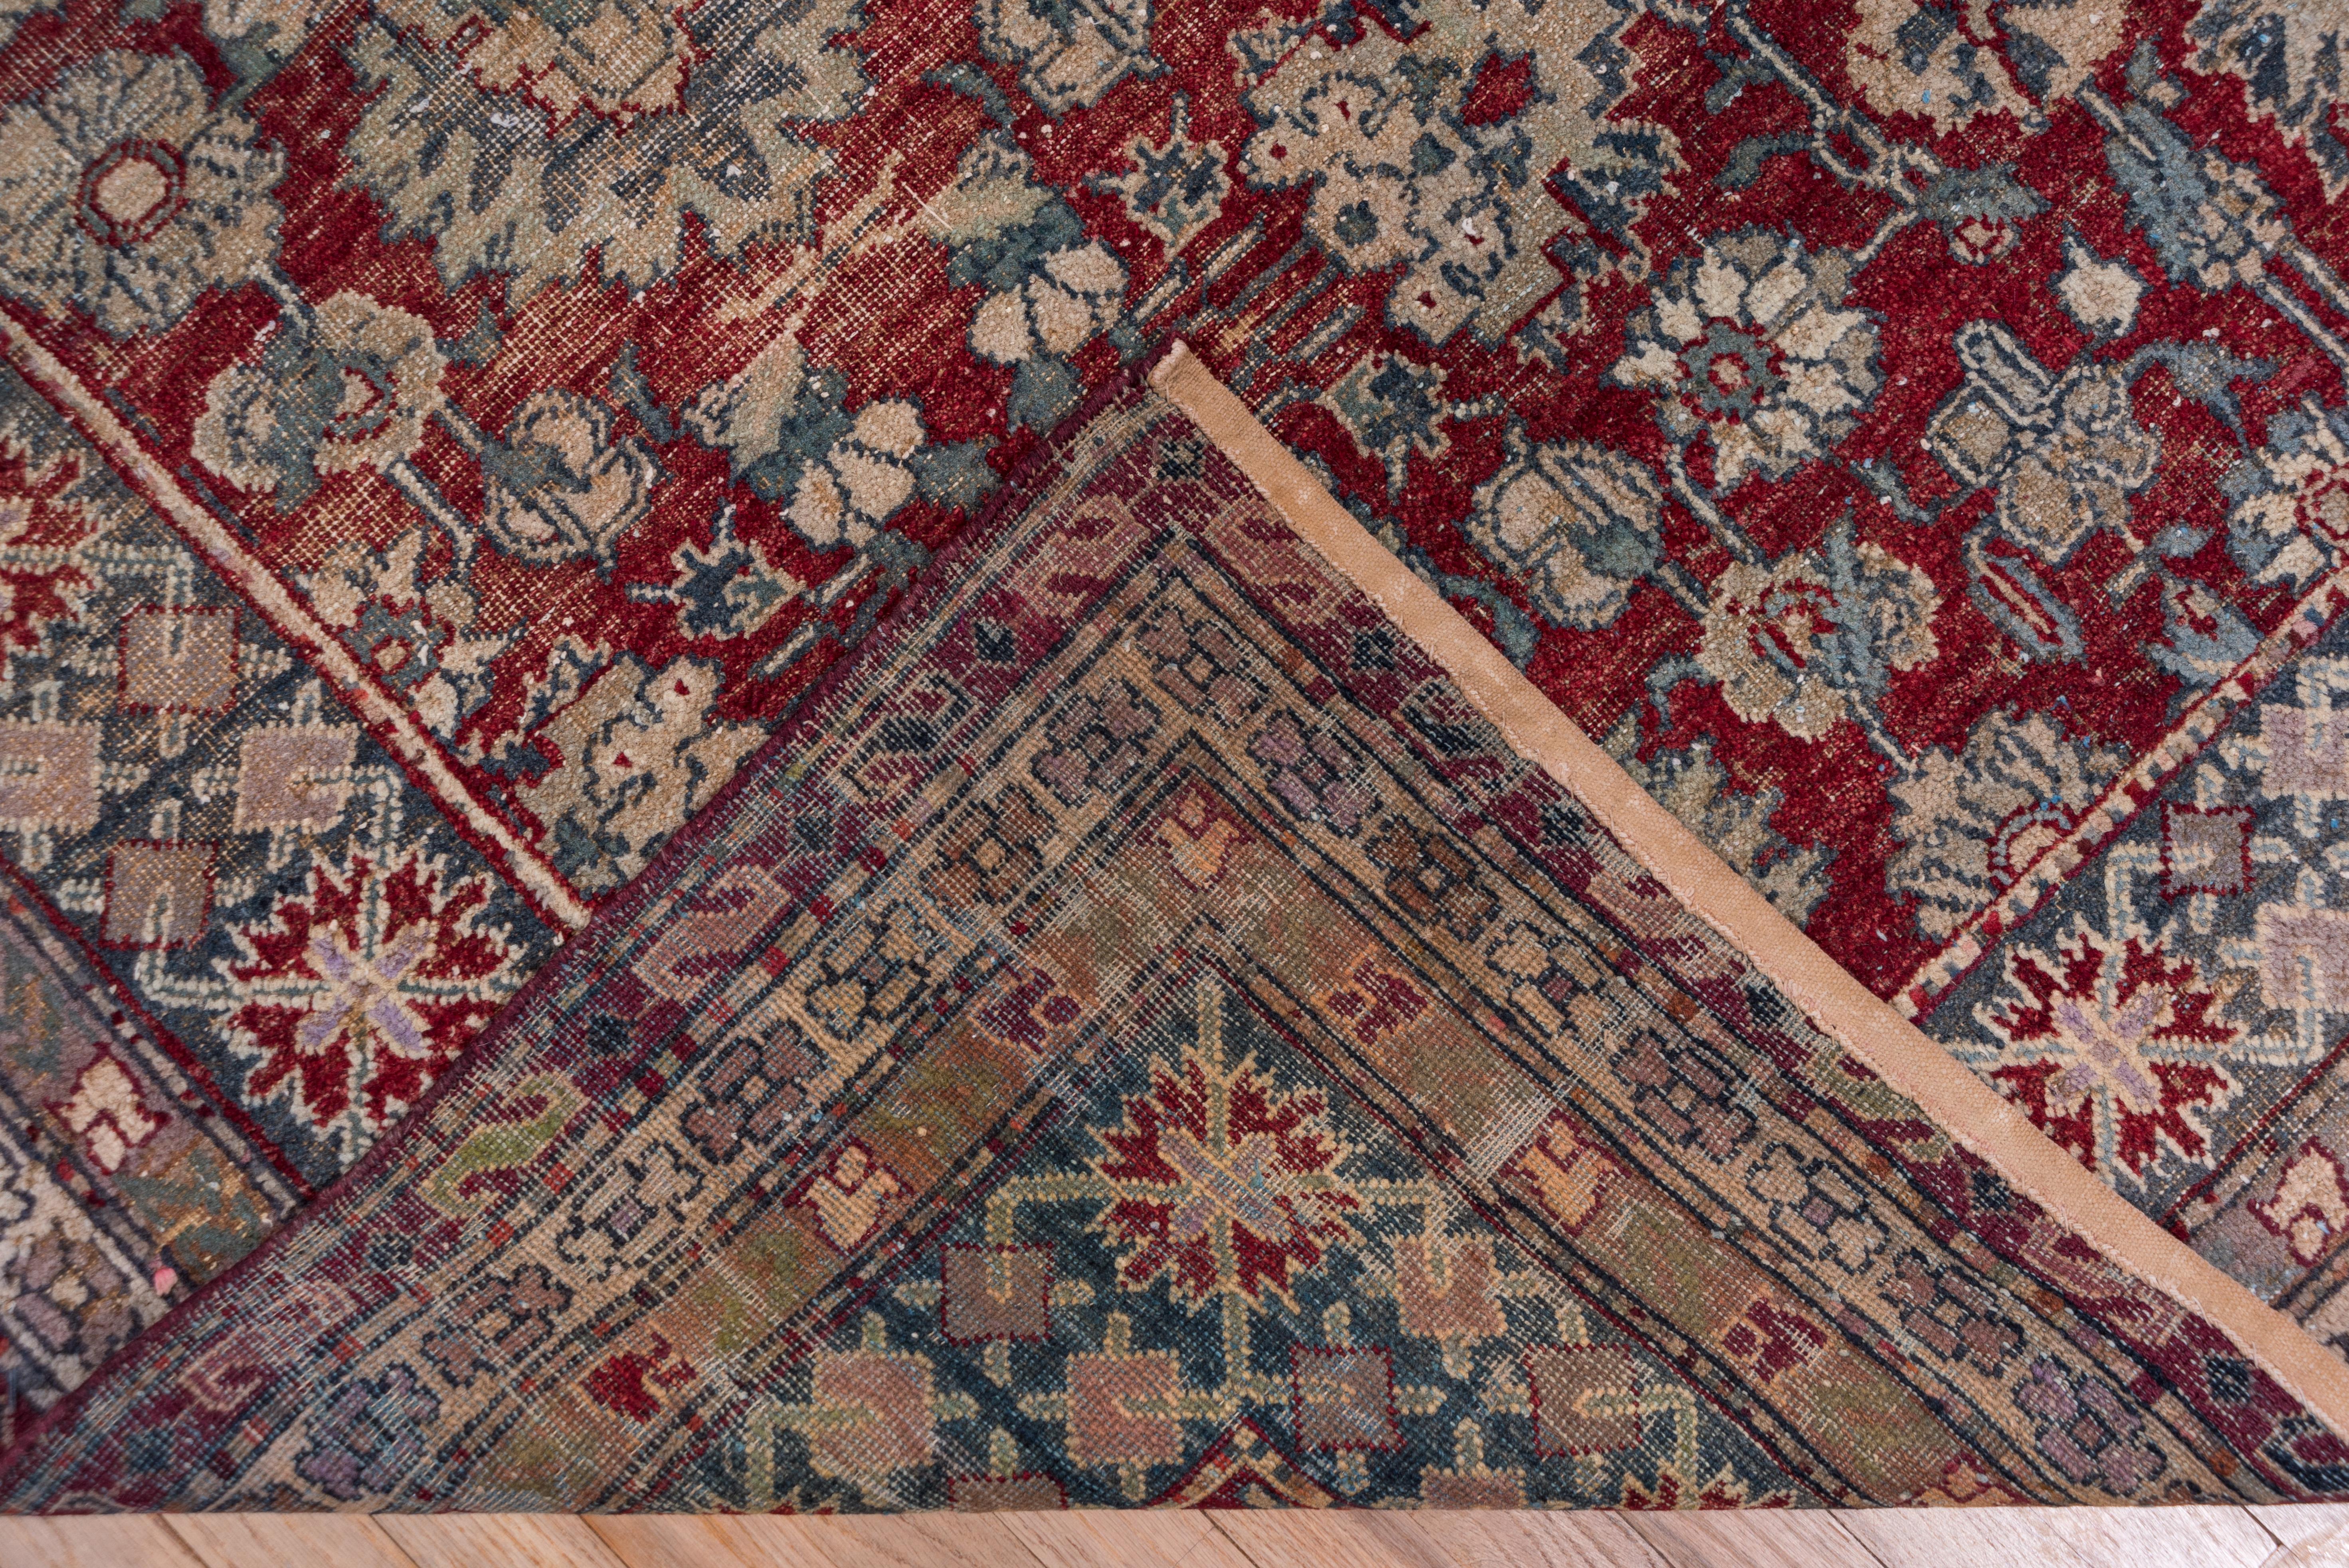 This northern Indian workshop carpet shows a well-organized all-over palmette pattern with a six palmette central axis and secondary six-palmette side axes. Four quarter symmetric with a rich burgundy red ground. Green, straw and buff details.